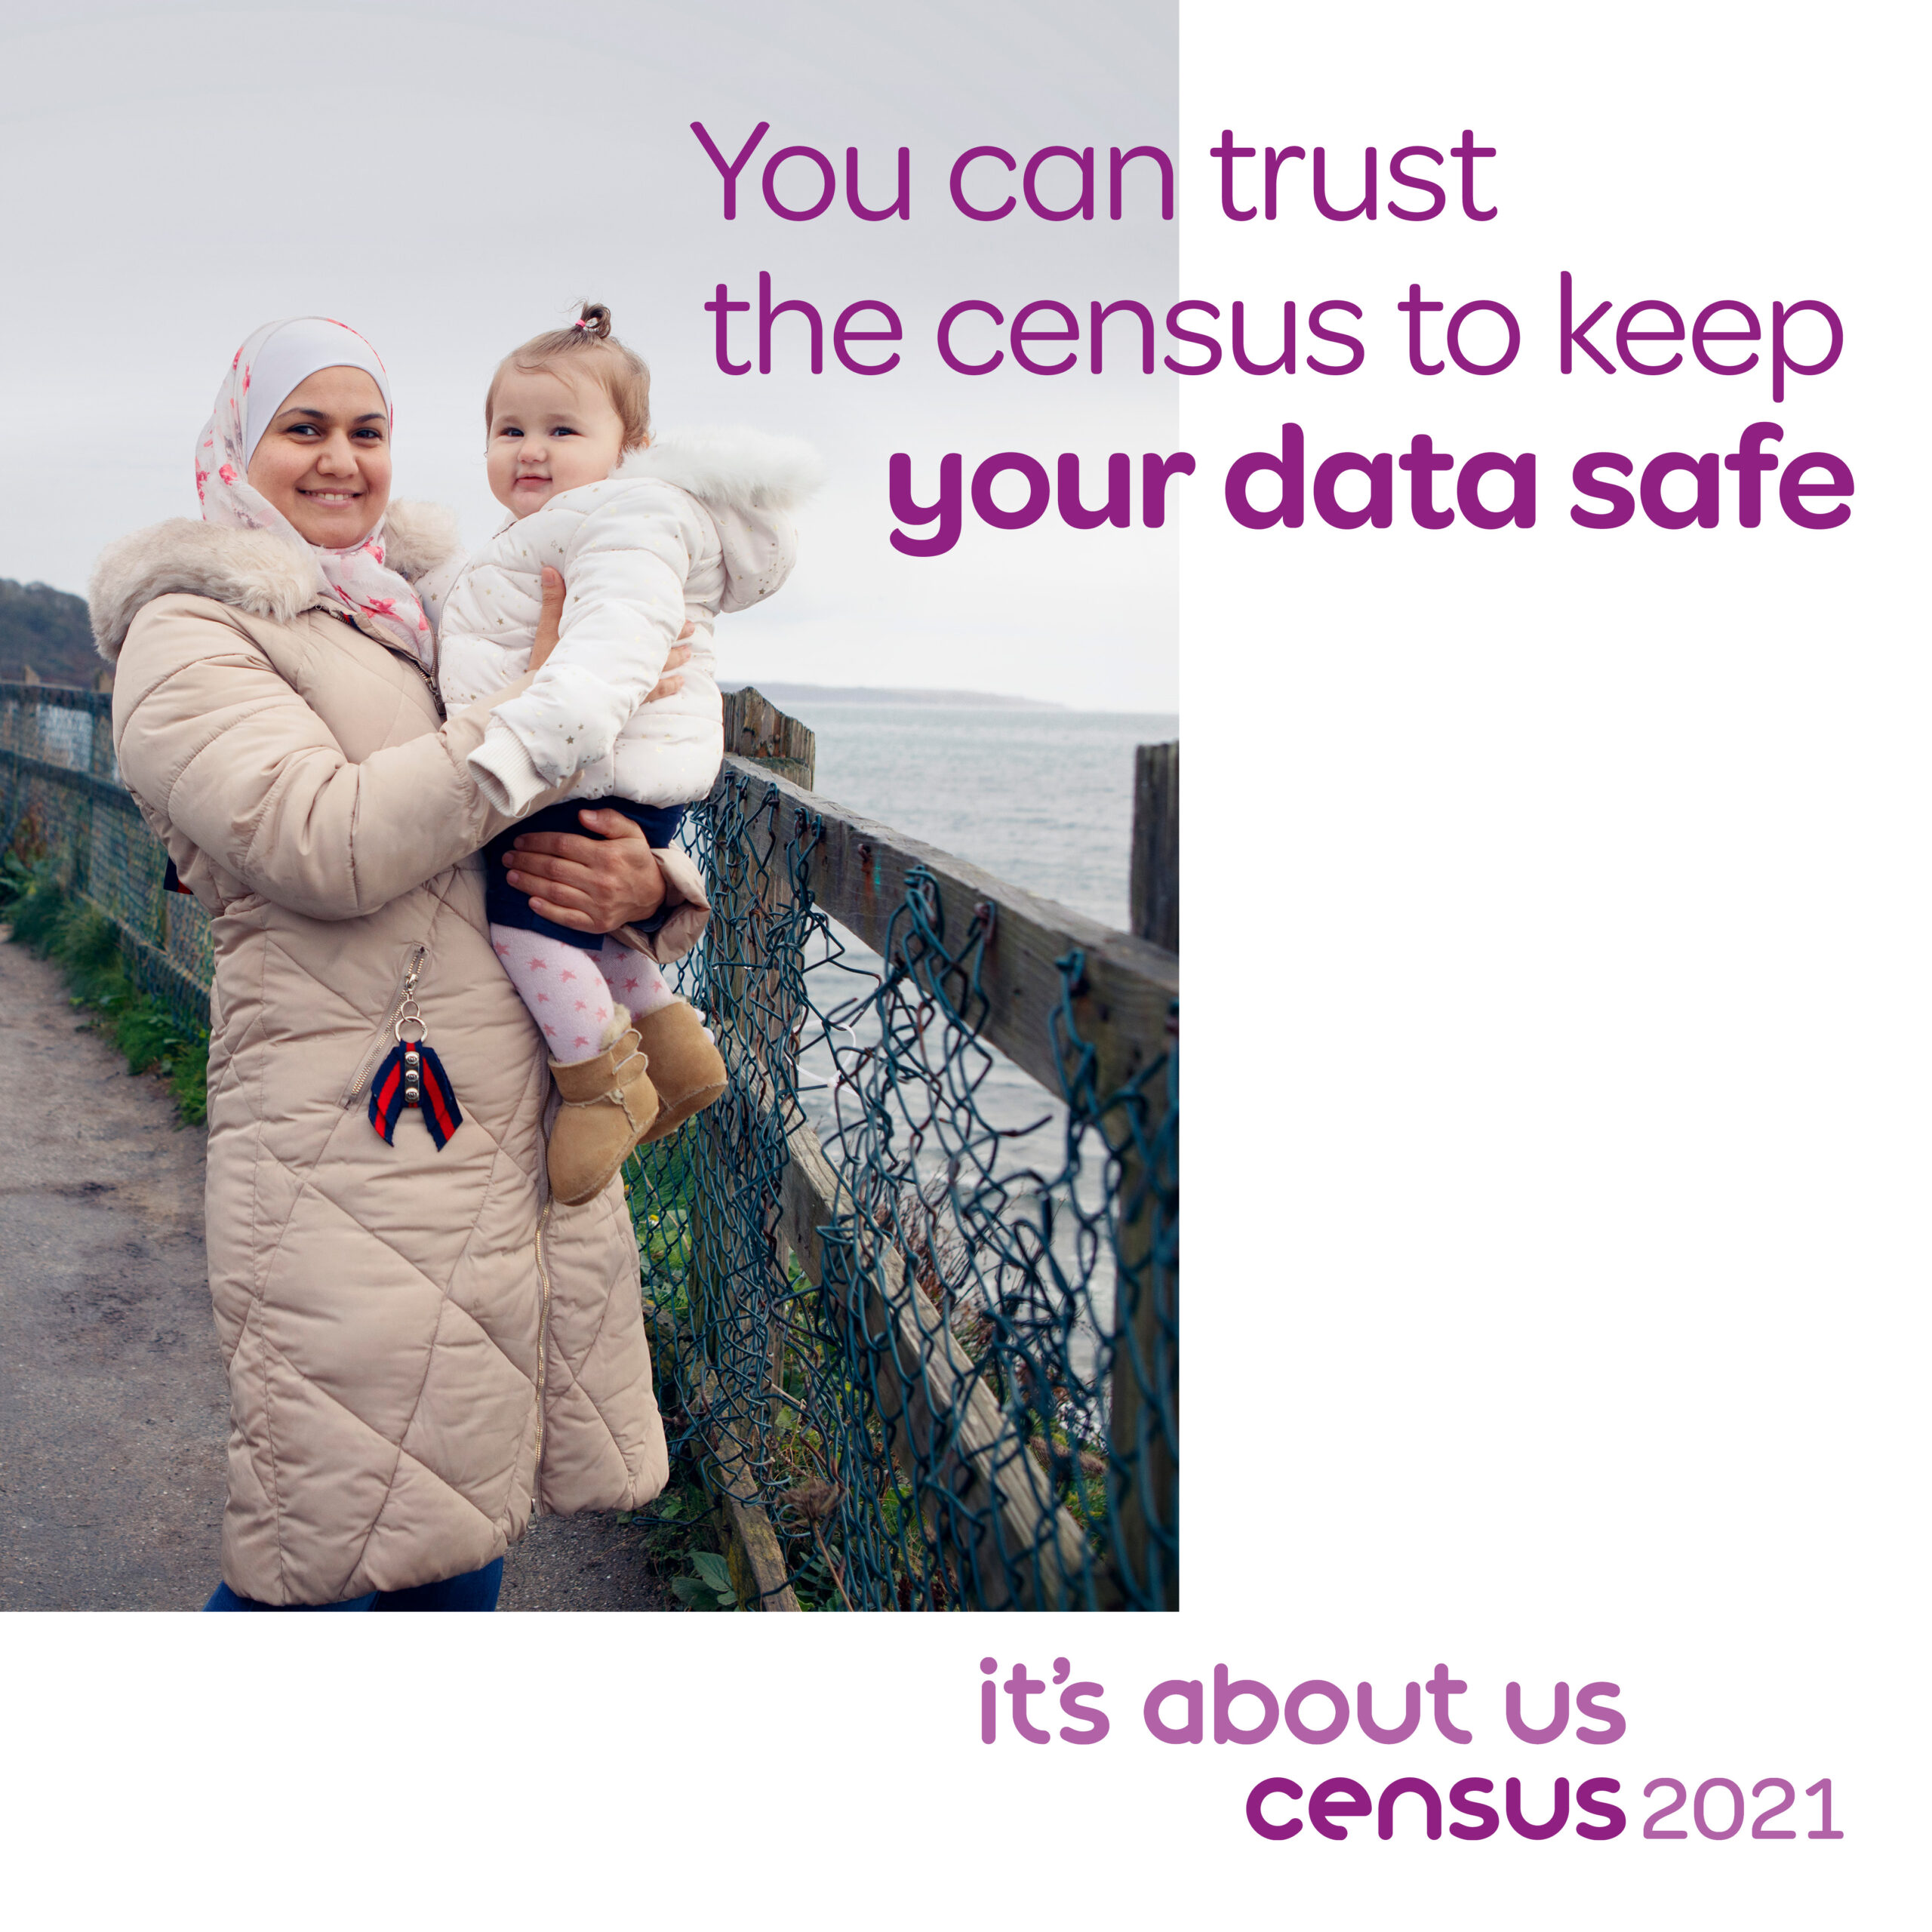 You can trust the census to keep your data safe it's about us census 2021